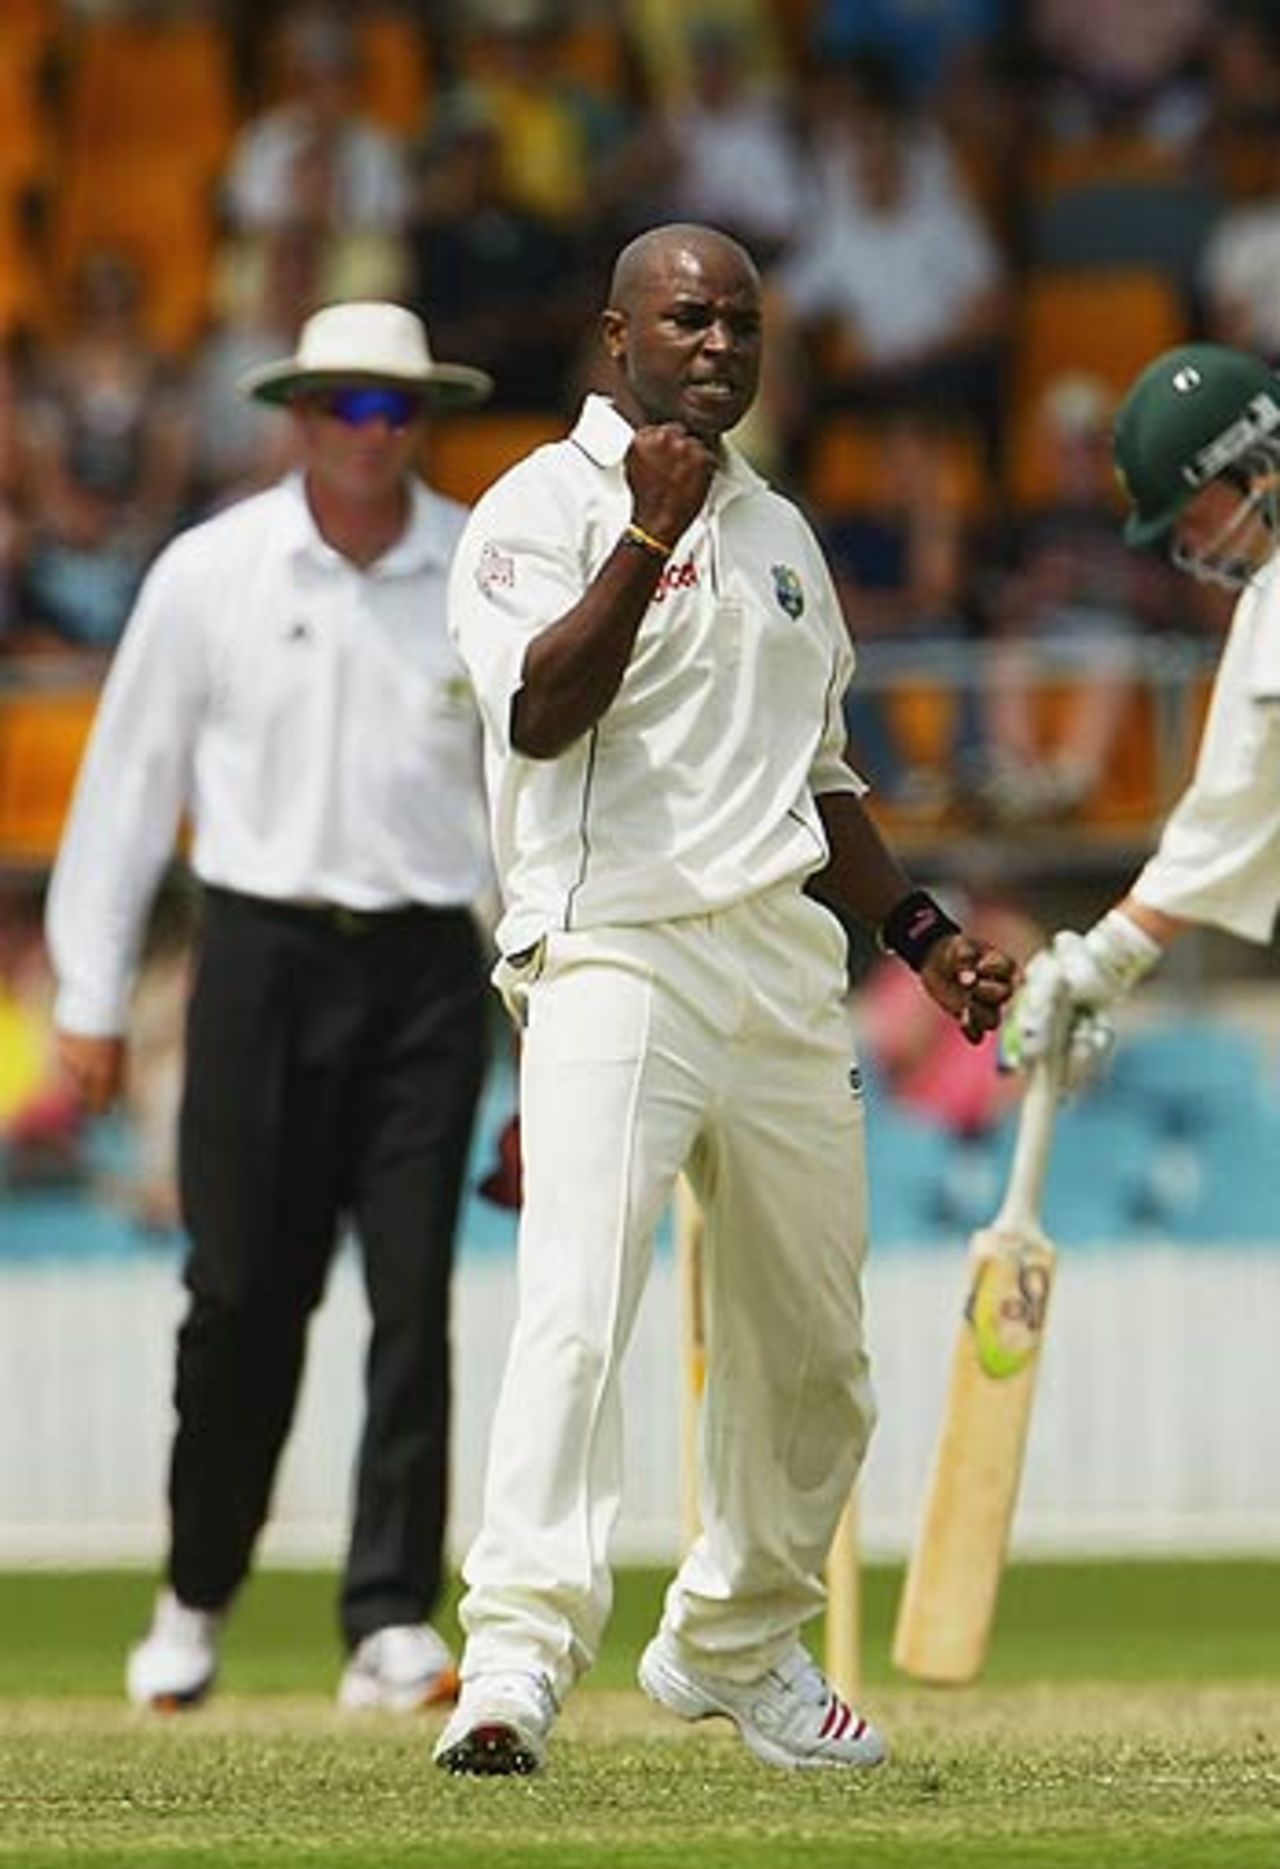 Tino Best celebrates the wicket of Travis Birt, Prime Minister's XI v West Indians, Canberra, December 2, 2005